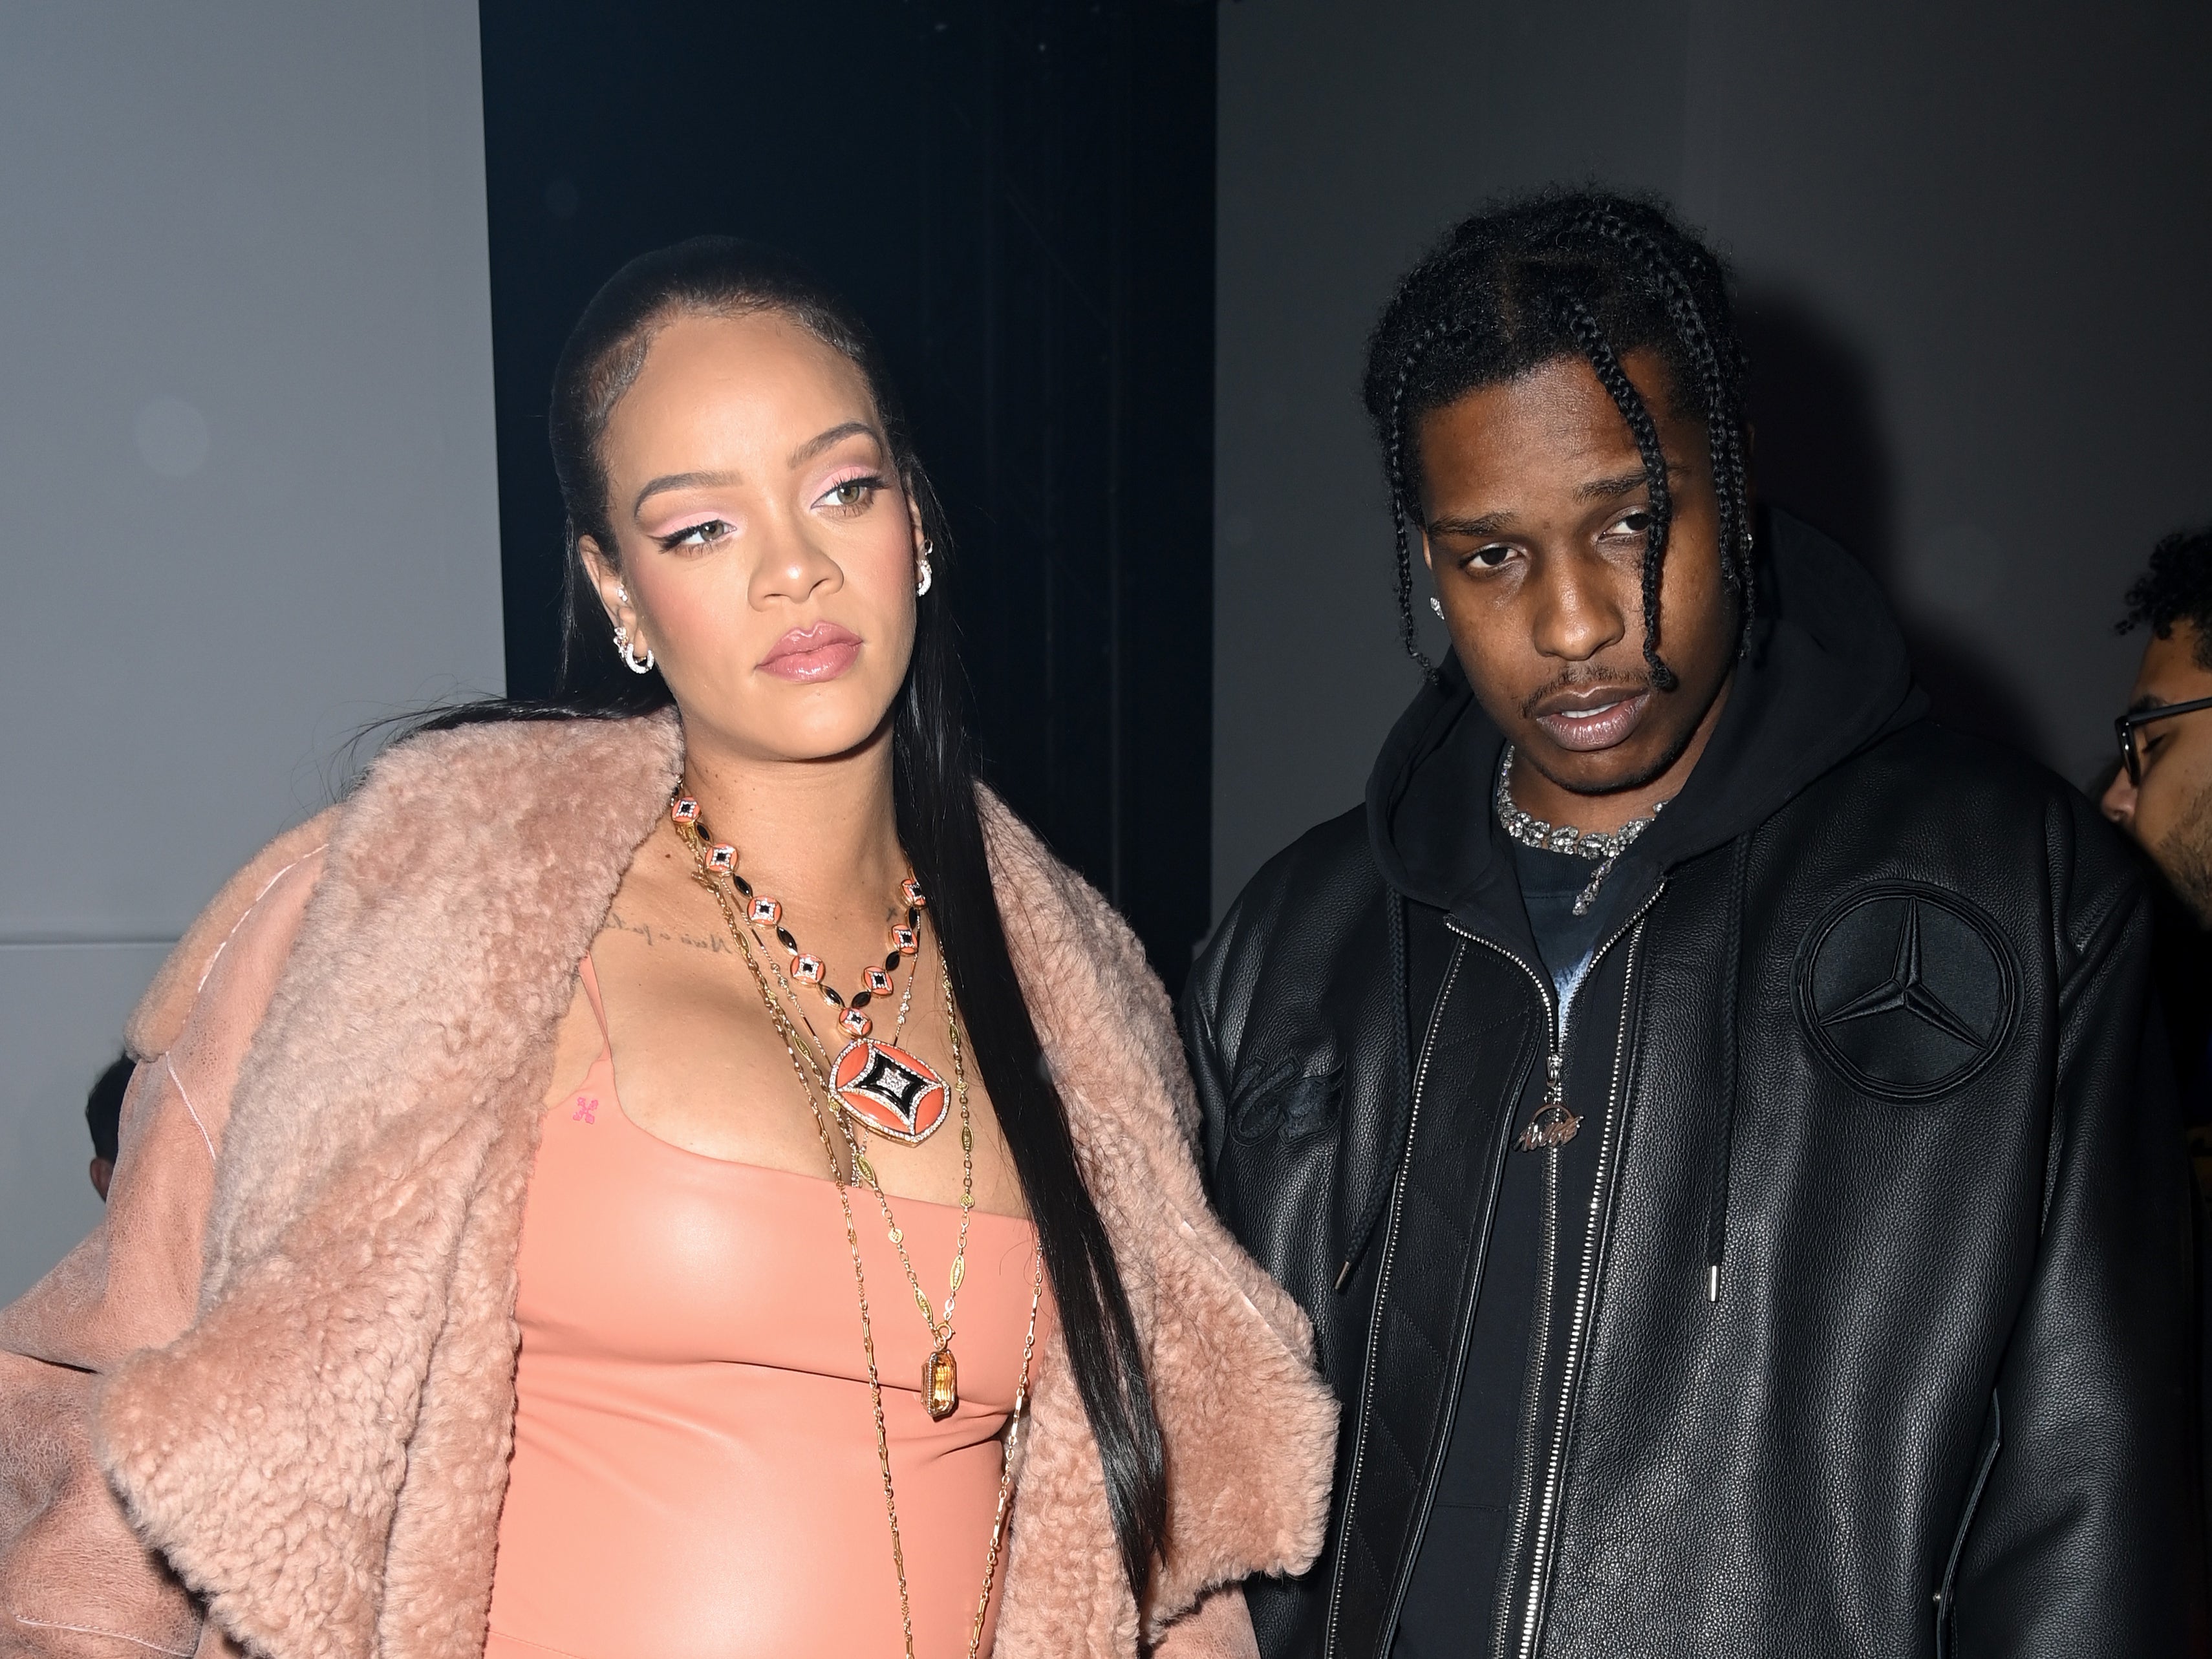 Rihanna and A$AP Rocky are expecting their first child together